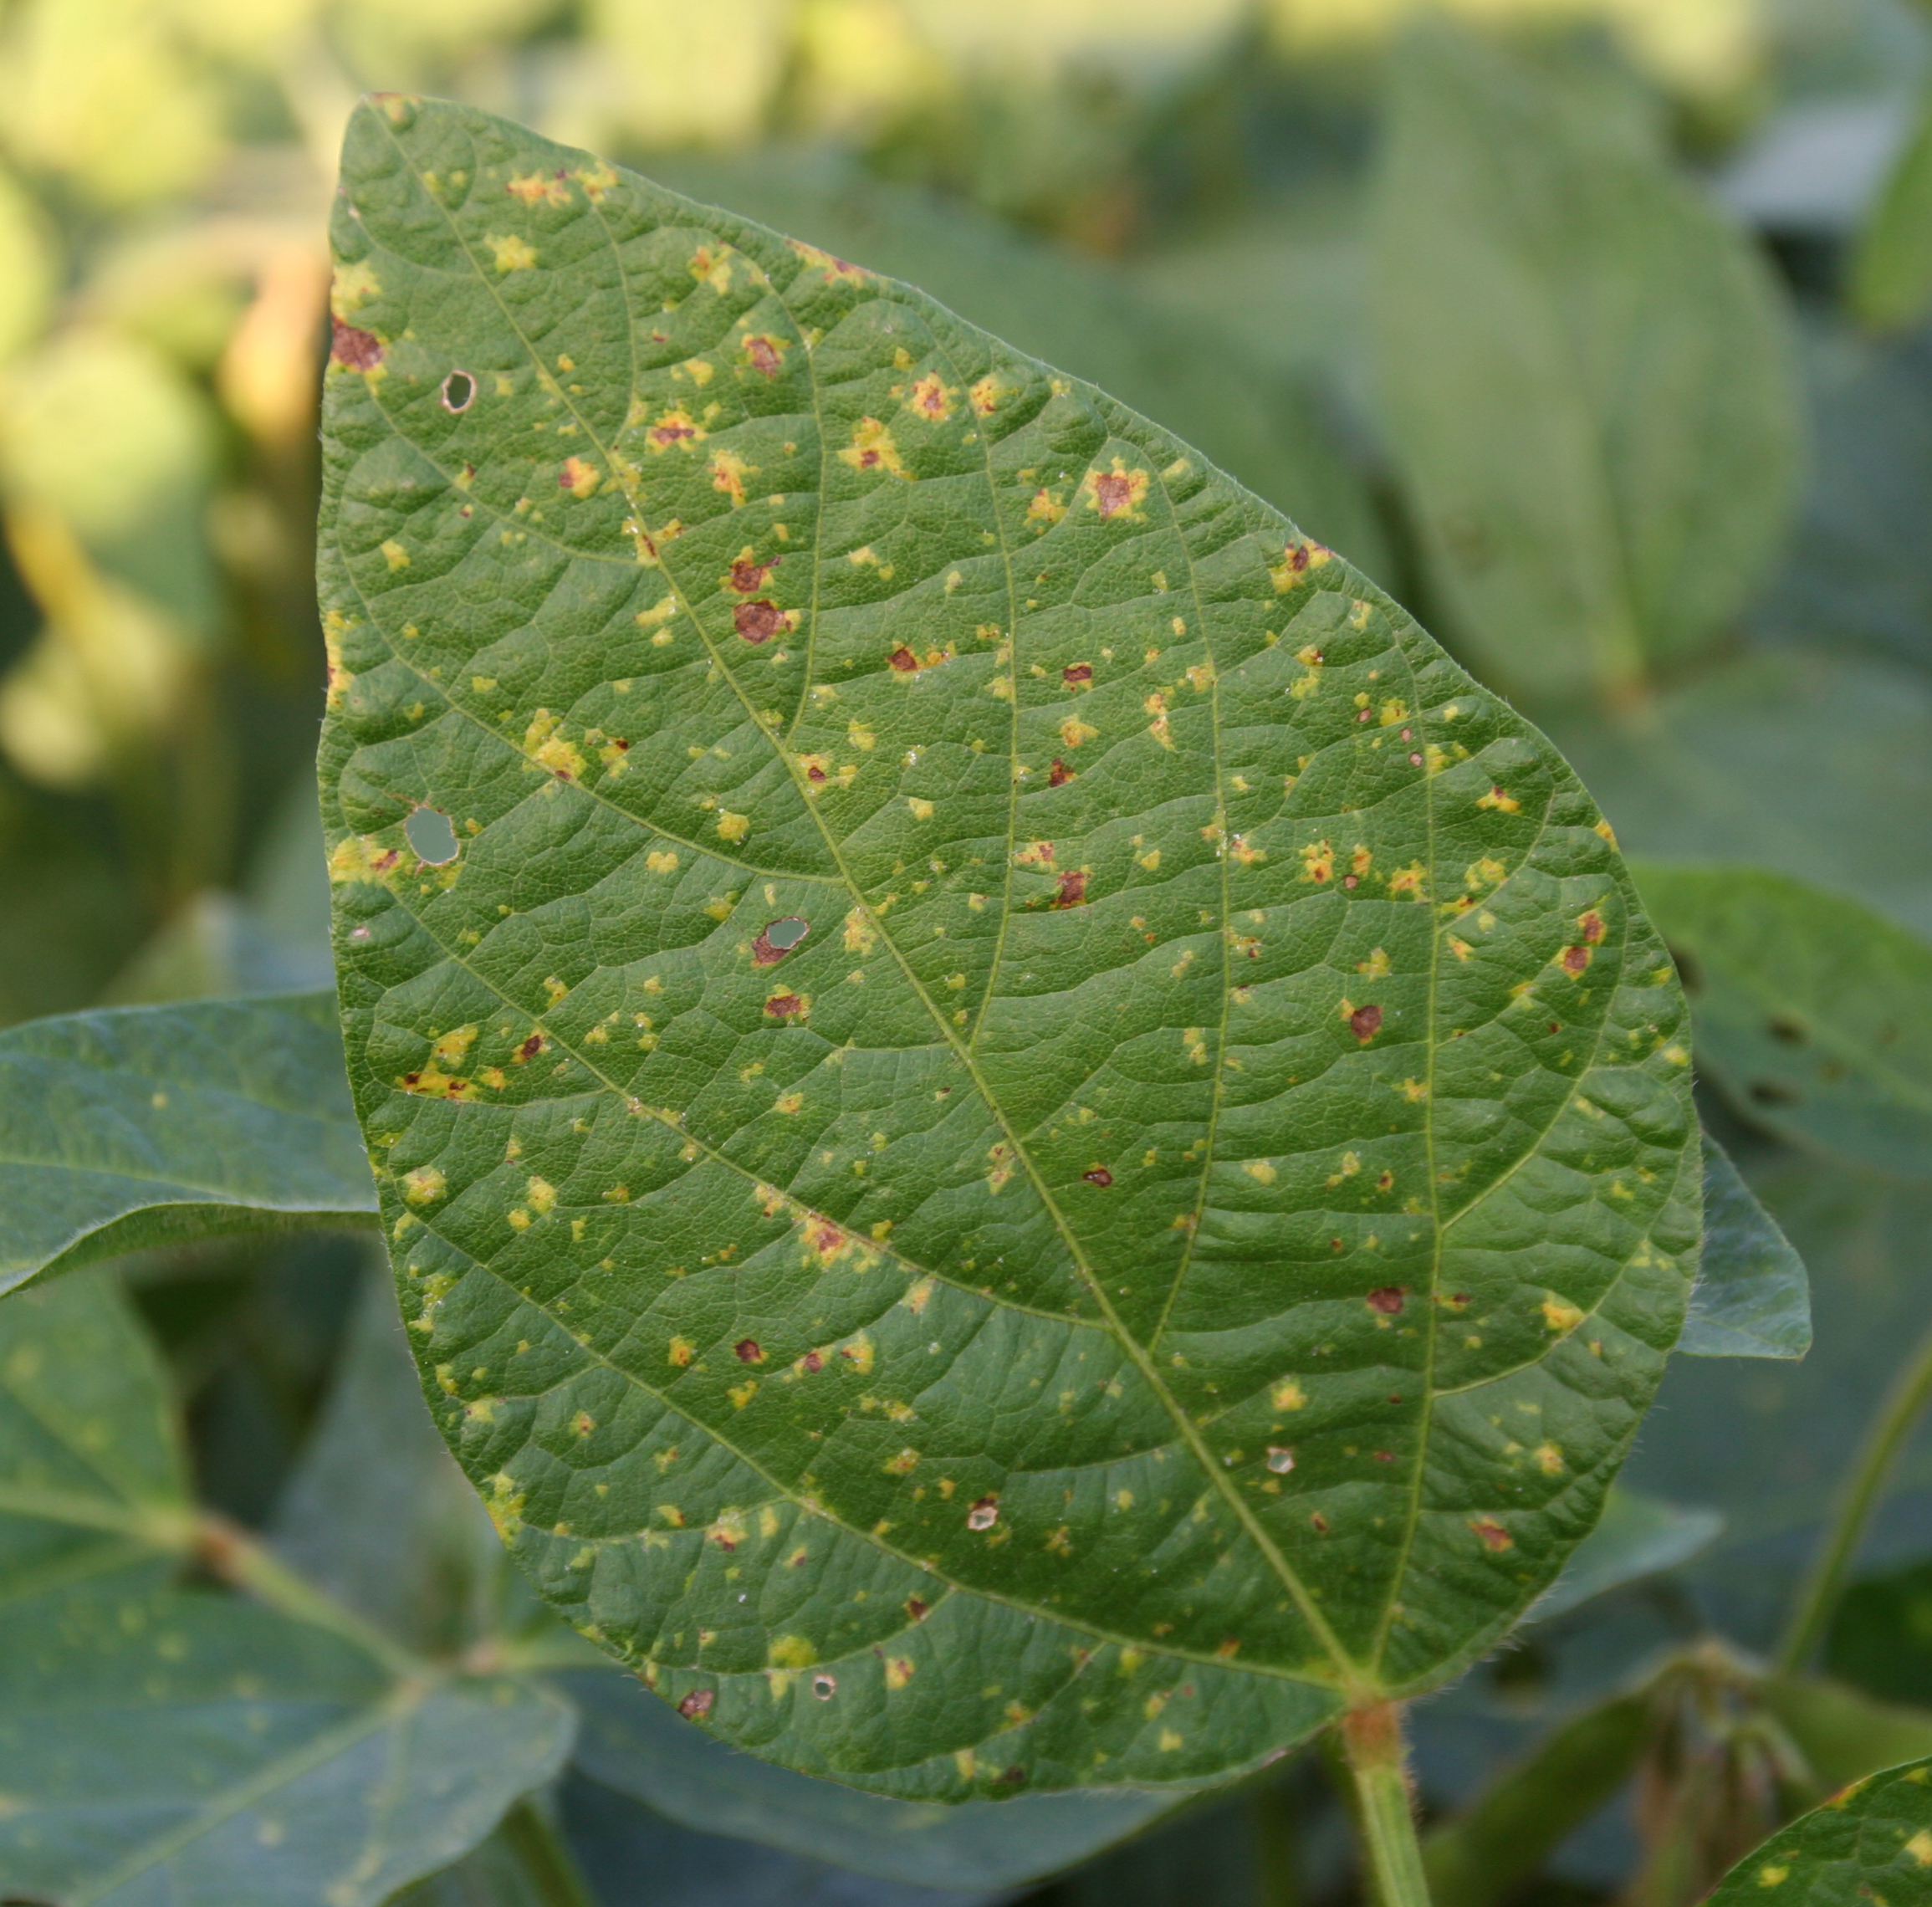 Older downy mildew lesions beginning to turn brown.